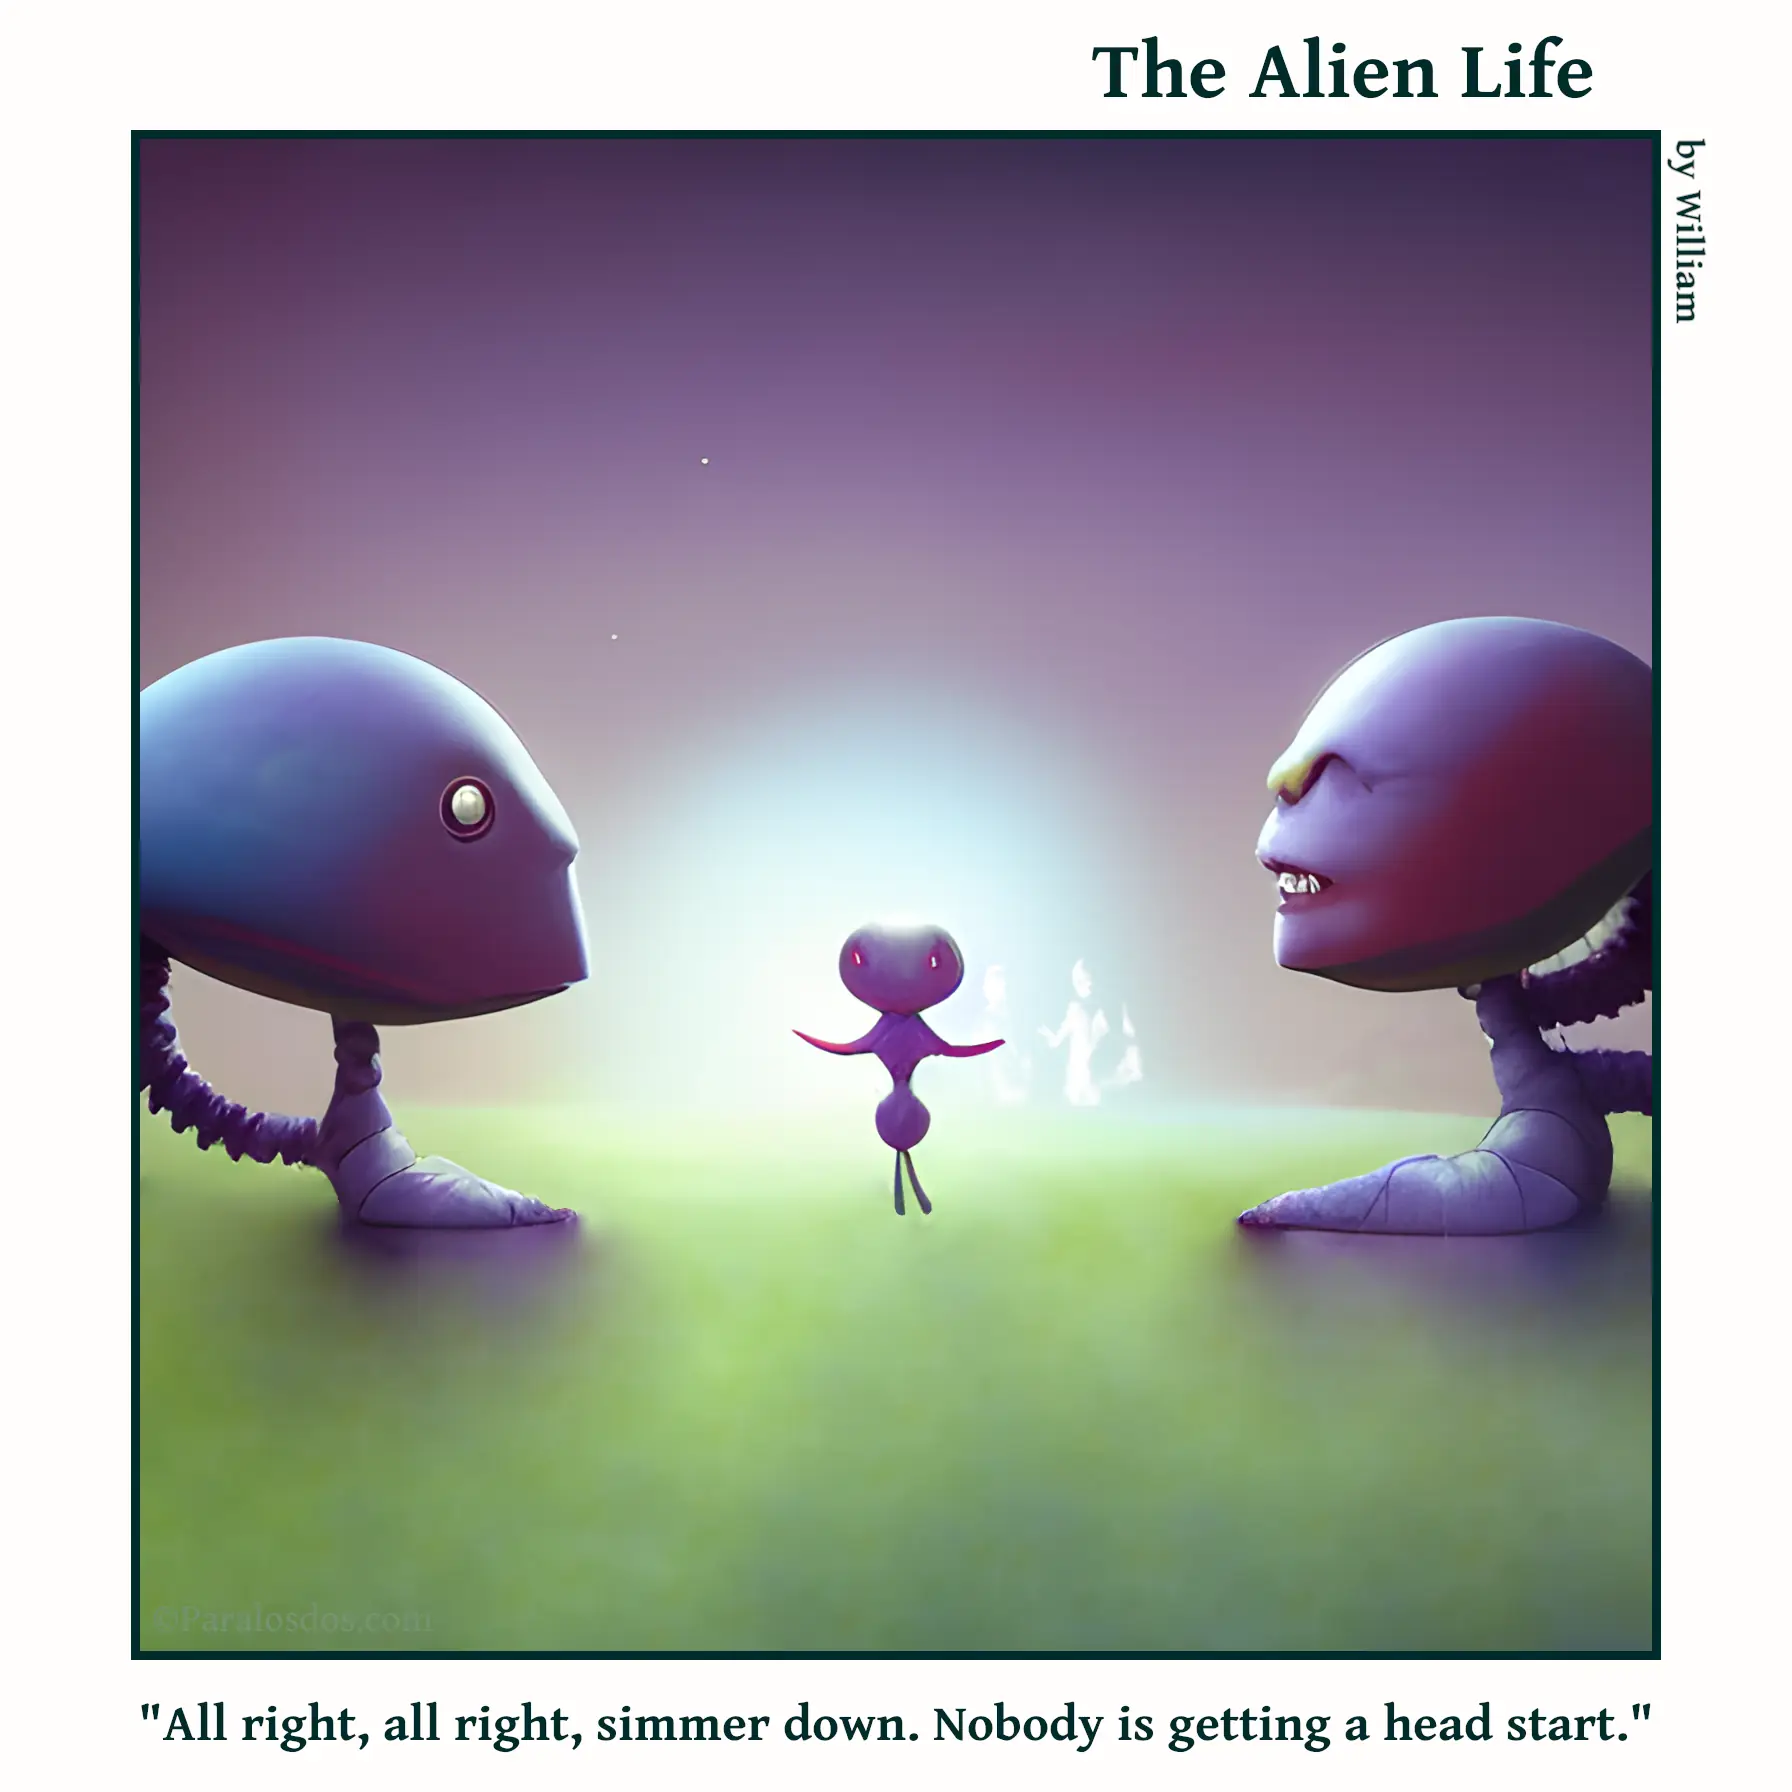 The Alien Life, one panel Comic. A small alien is standing between two aliens who are mostly just giant heads. The caption reads: "All right, all right, simmer down. Nobody is getting a head start."